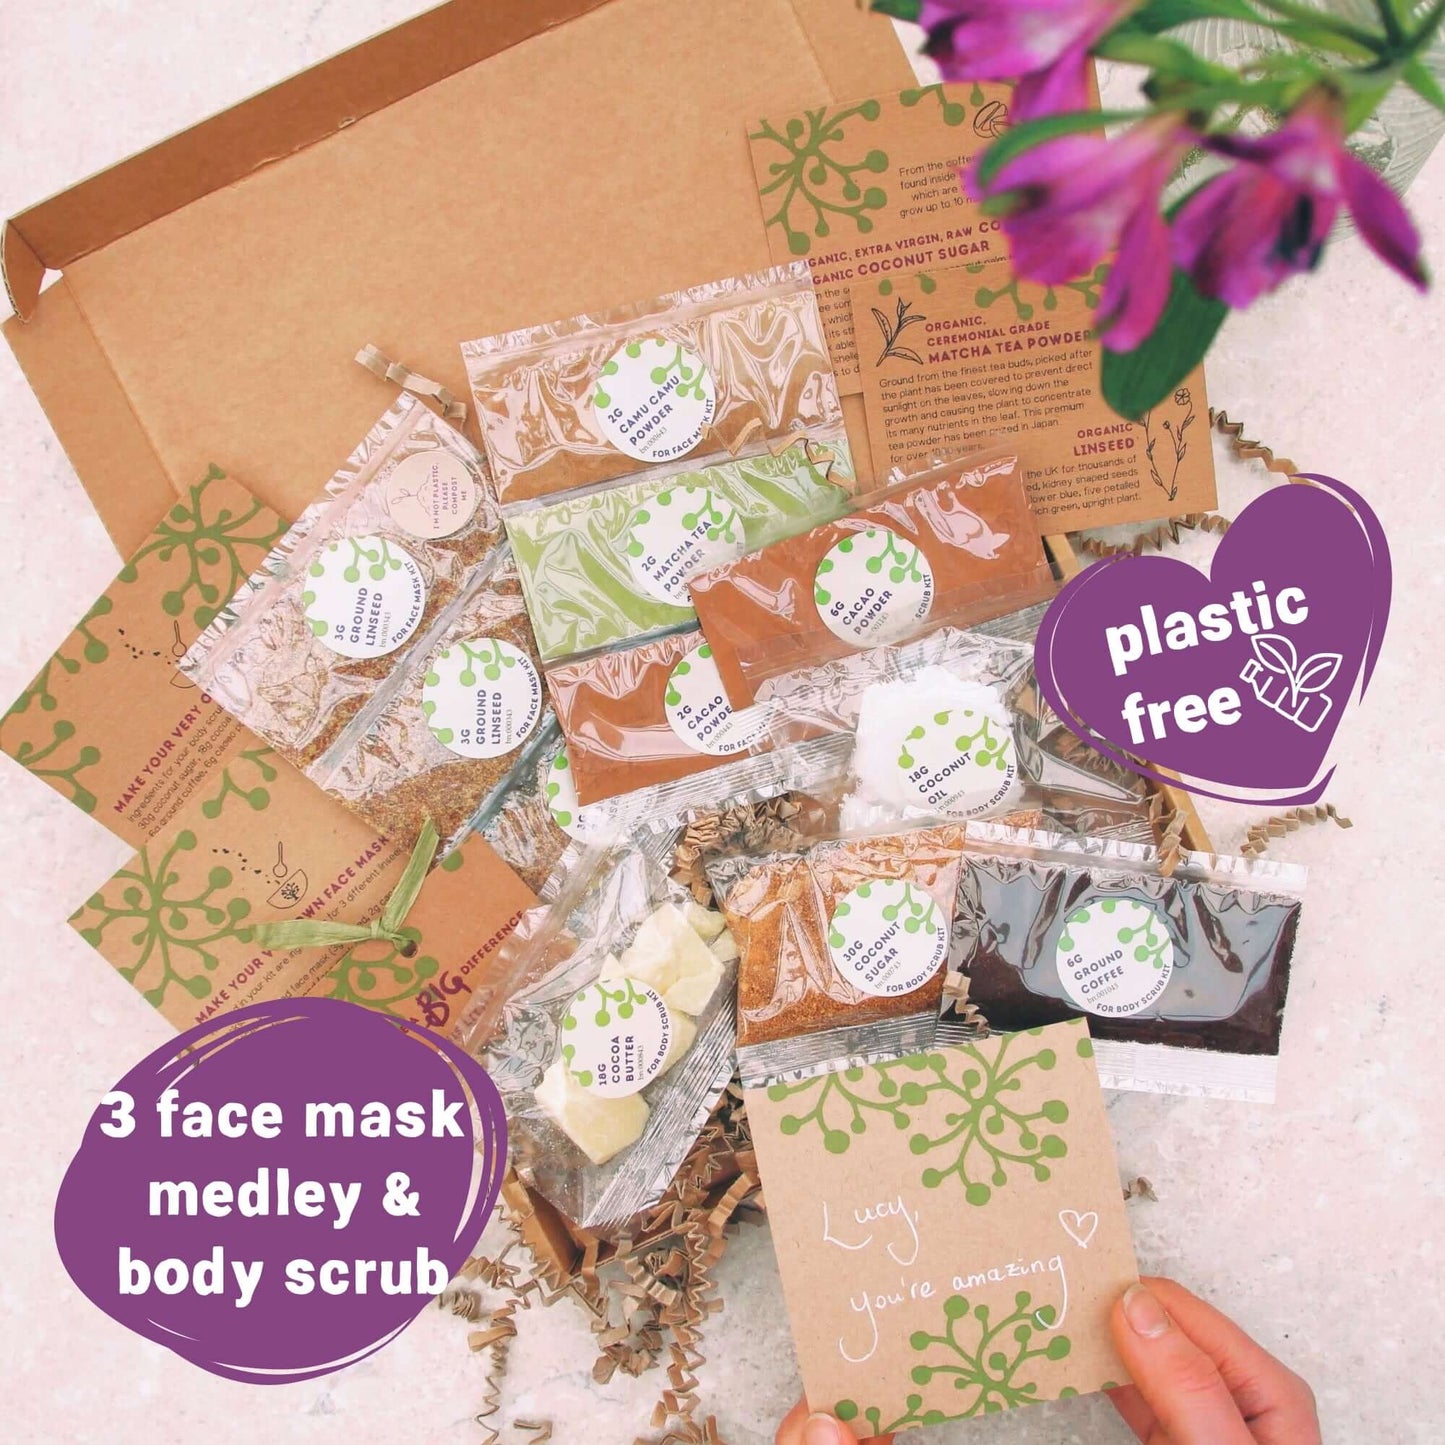 organic vegan ingredients to make 3 face mask kits and a body scrub kit, packaged in eco-friendly plastic free packaging